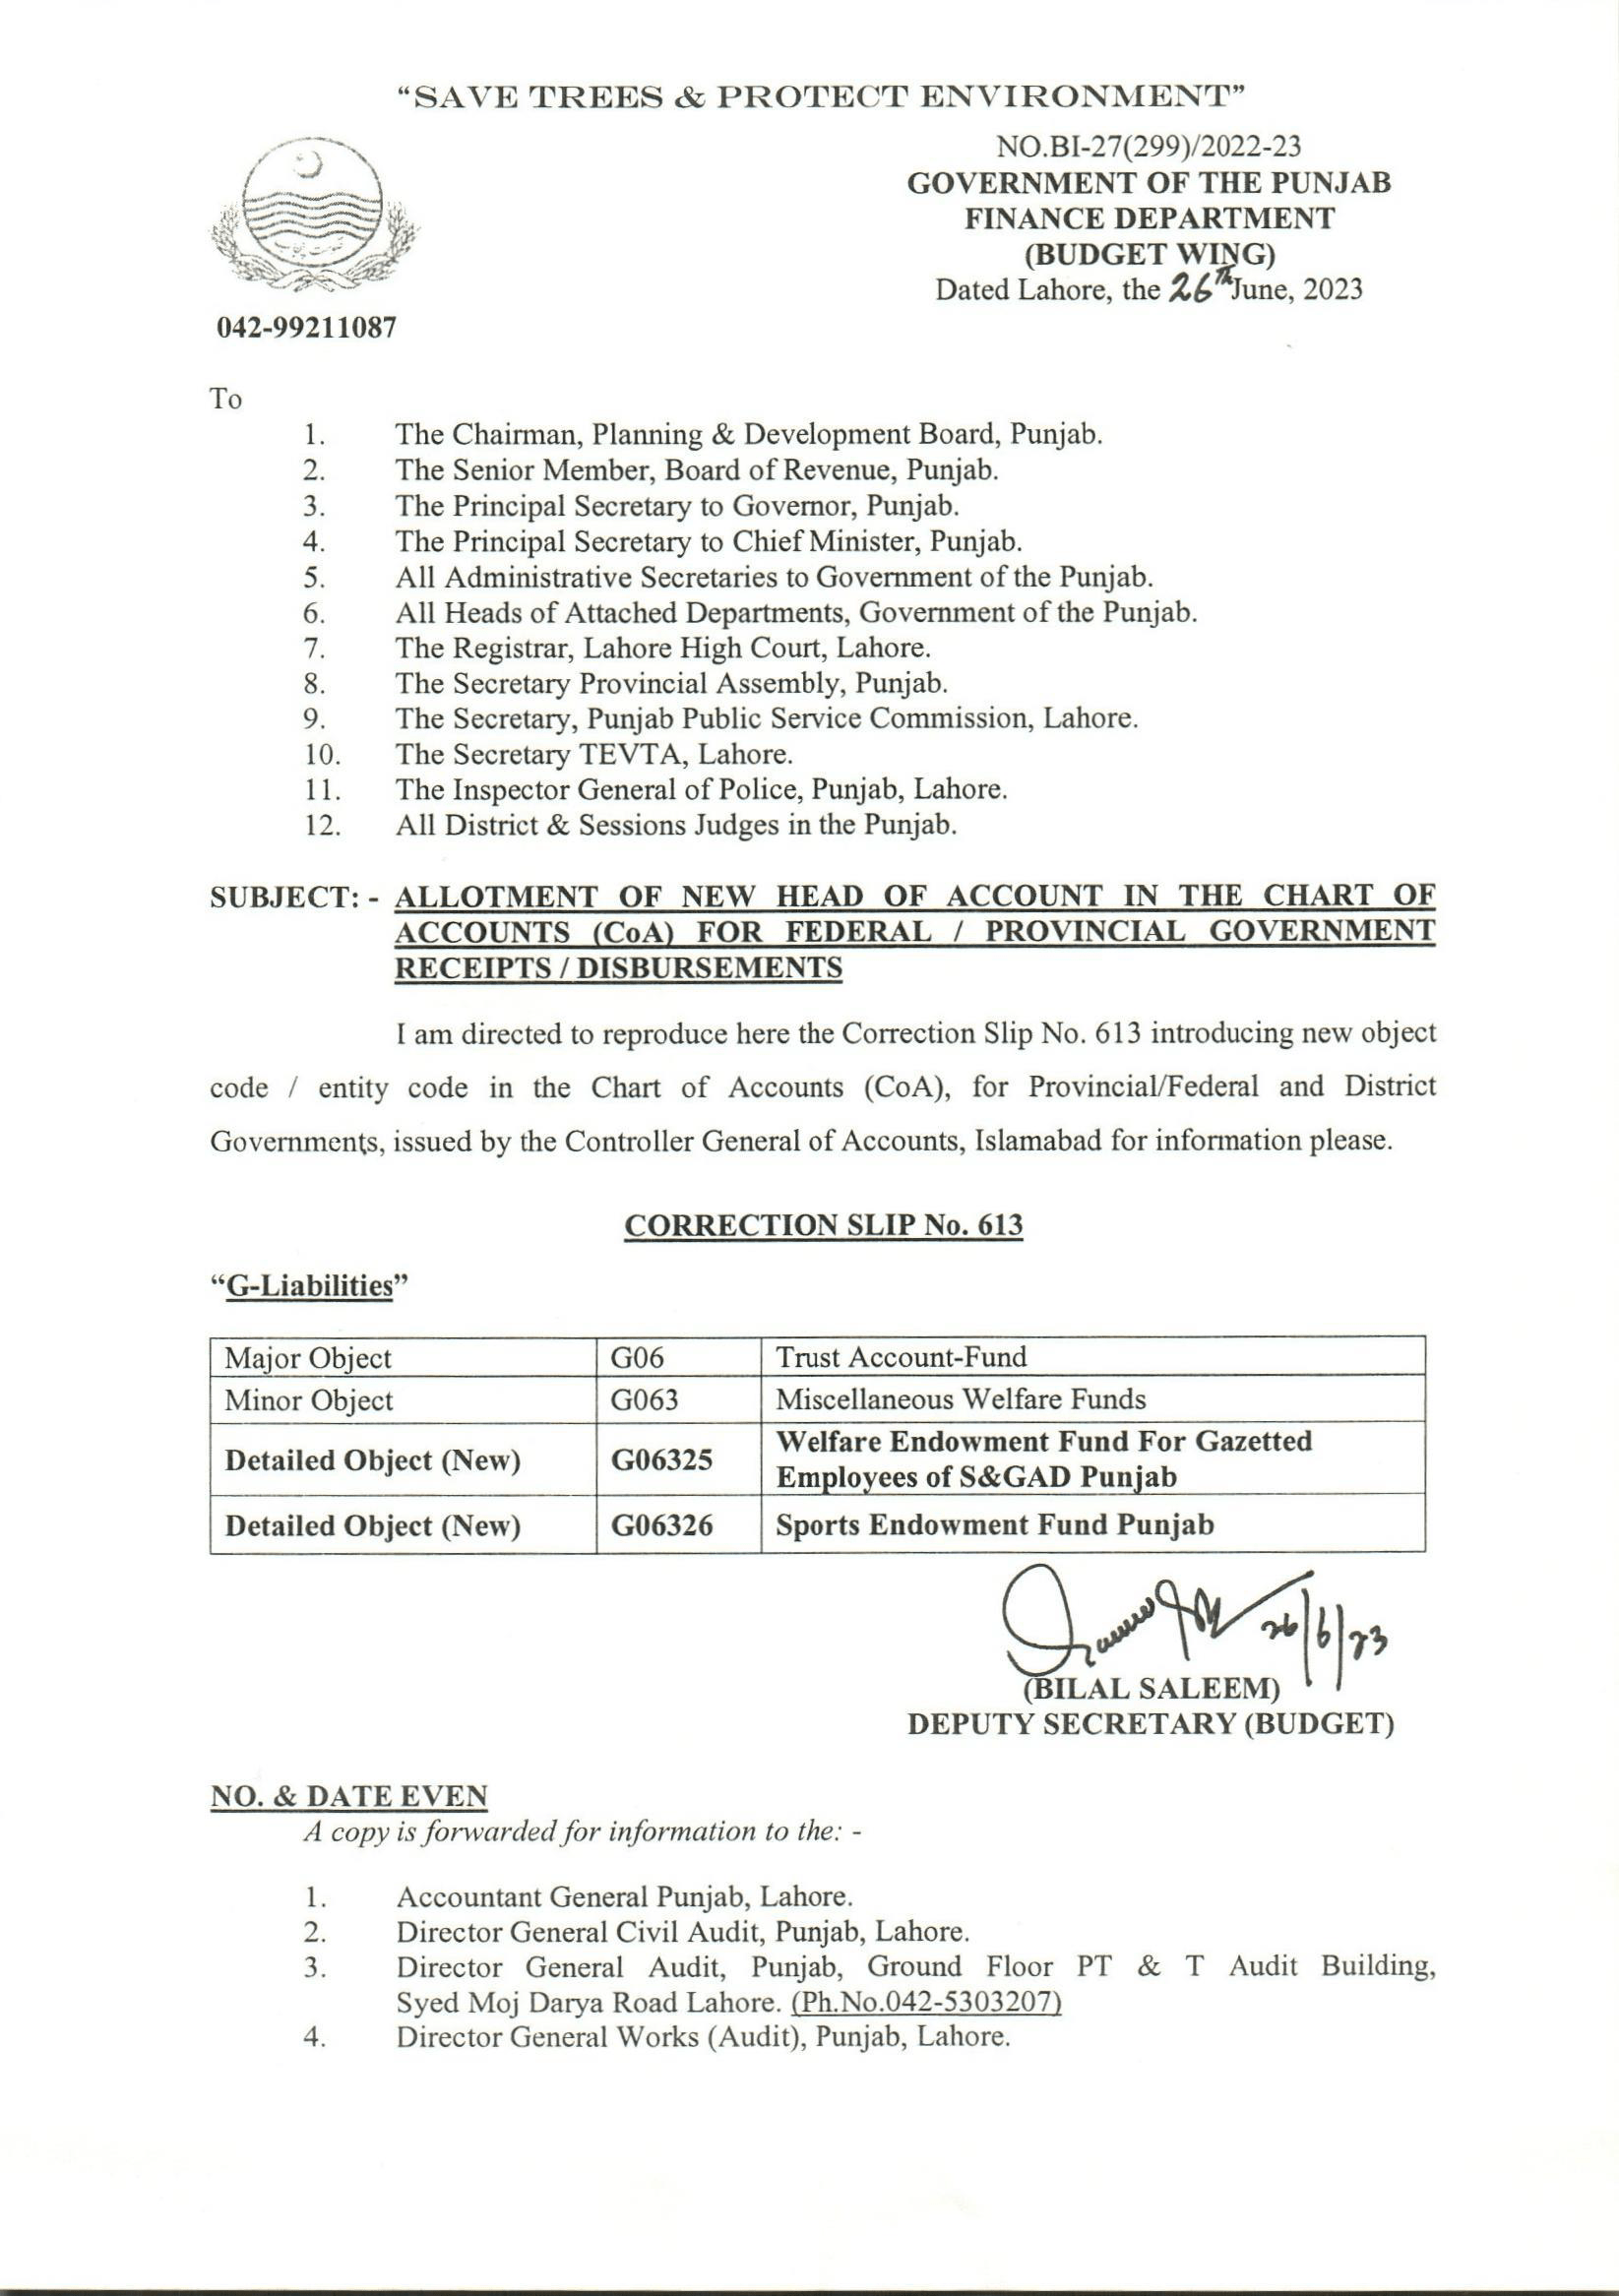 Allotment of New Head of Accounts in the Chart of Accounts for Federal/Provincial and District Government